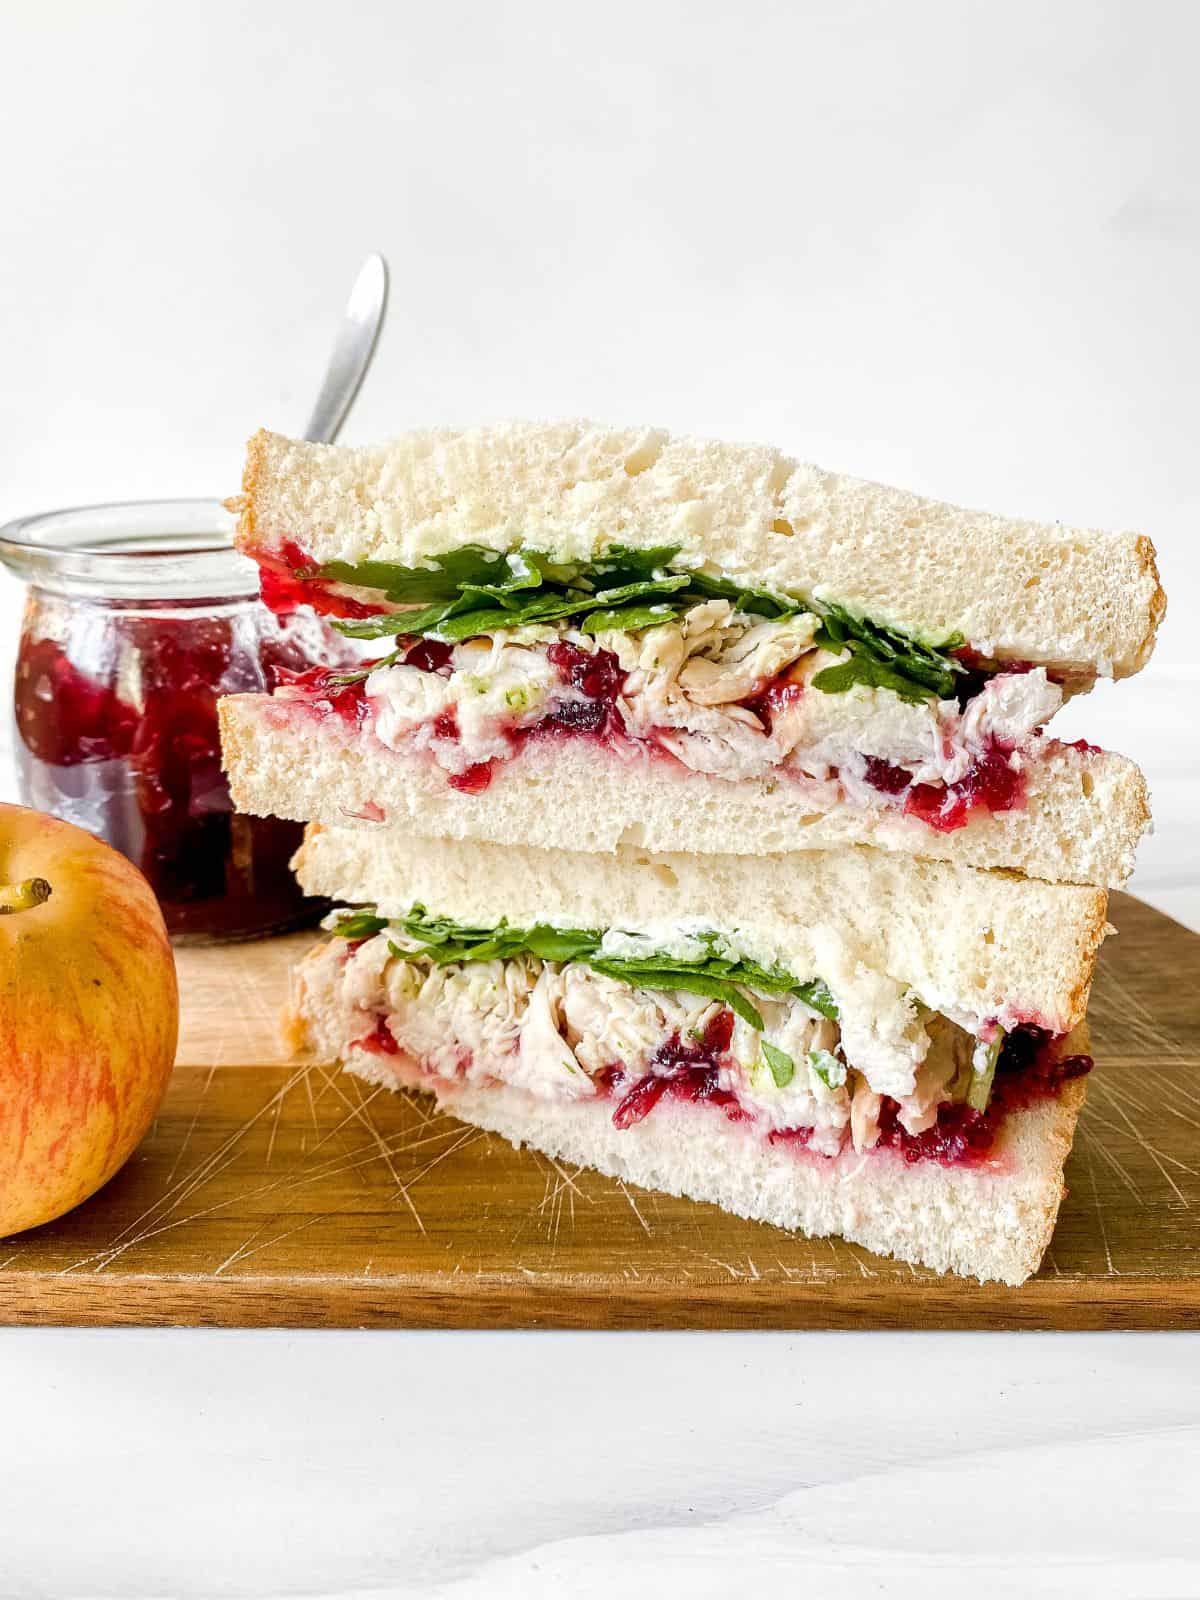 turkey cranberry cream cheese sandwich on a wooden board next to an apple and jar of cranberry sauce.